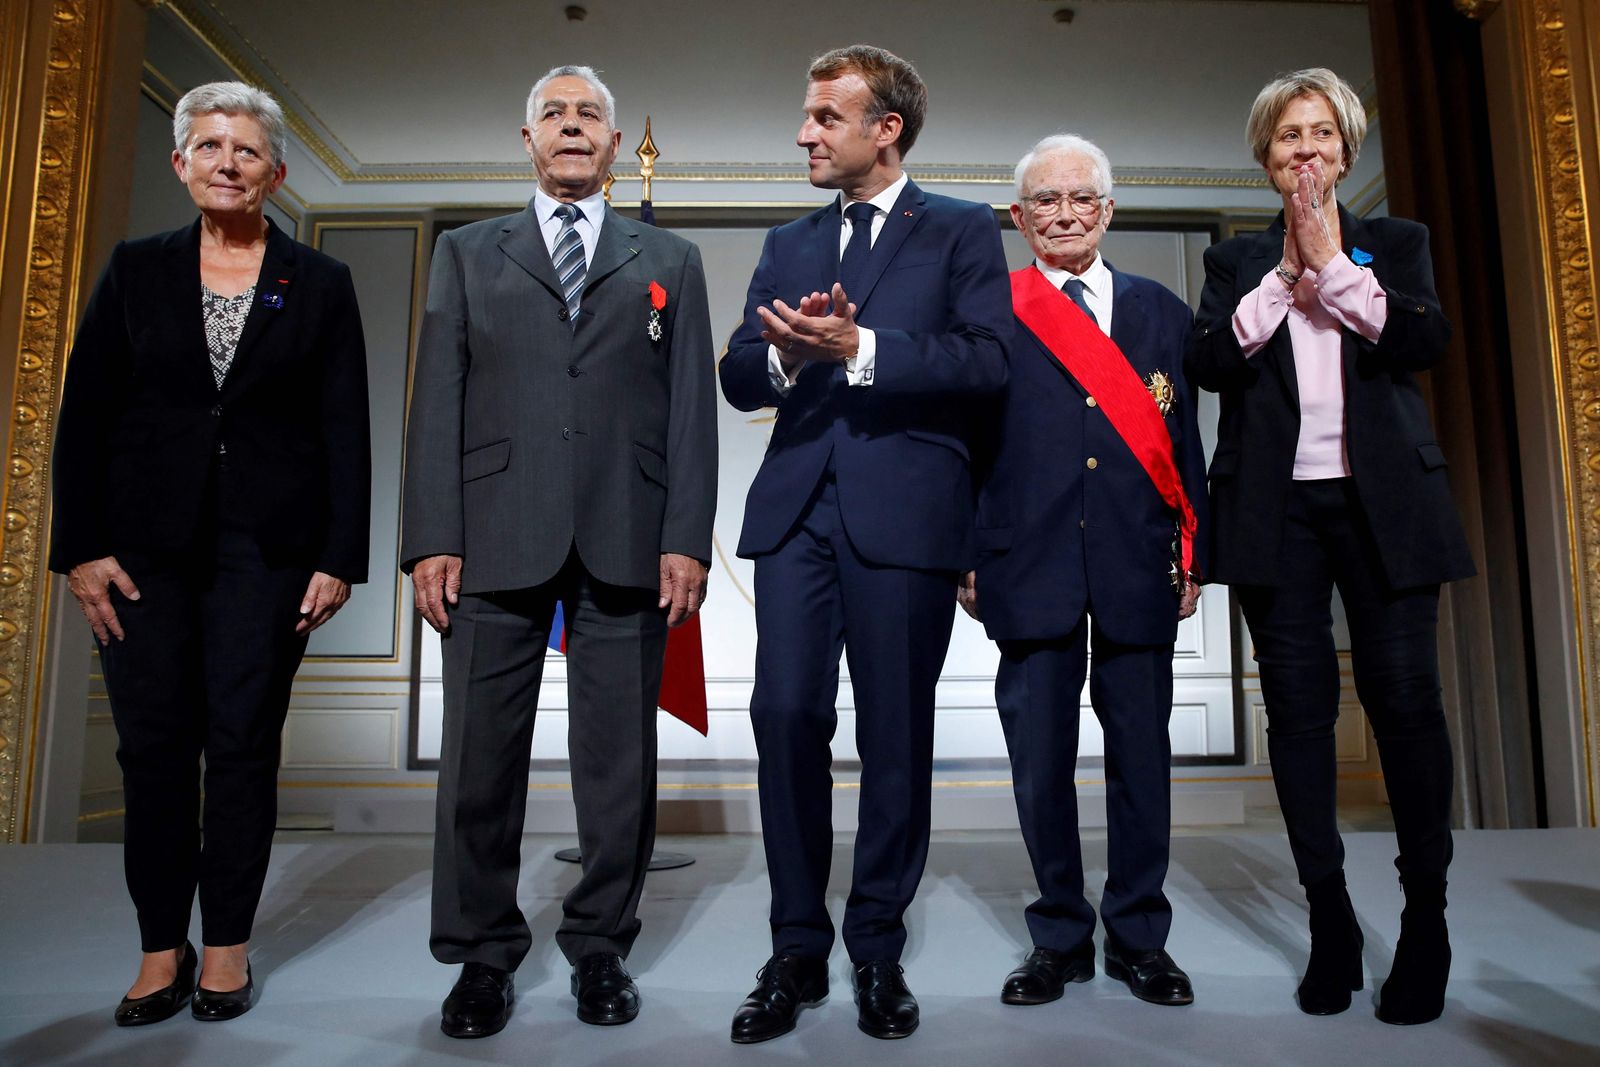 General Francois Meyer (2ndR), Salah Abdelkrim (2ndL) and Bornia Tarall (R) pose with French President Emmanuel Macron (C) and Junior Minister for Defence Genevieve Darrieussecq (L) after being awarded during a ceremony in memory of the Harkis, Algerians who helped the French Army in the Algerian War of Independence, at the Elysee Palace in Paris, on September 20, 2021. (Photo by GONZALO FUENTES / POOL / AFP) - AFP